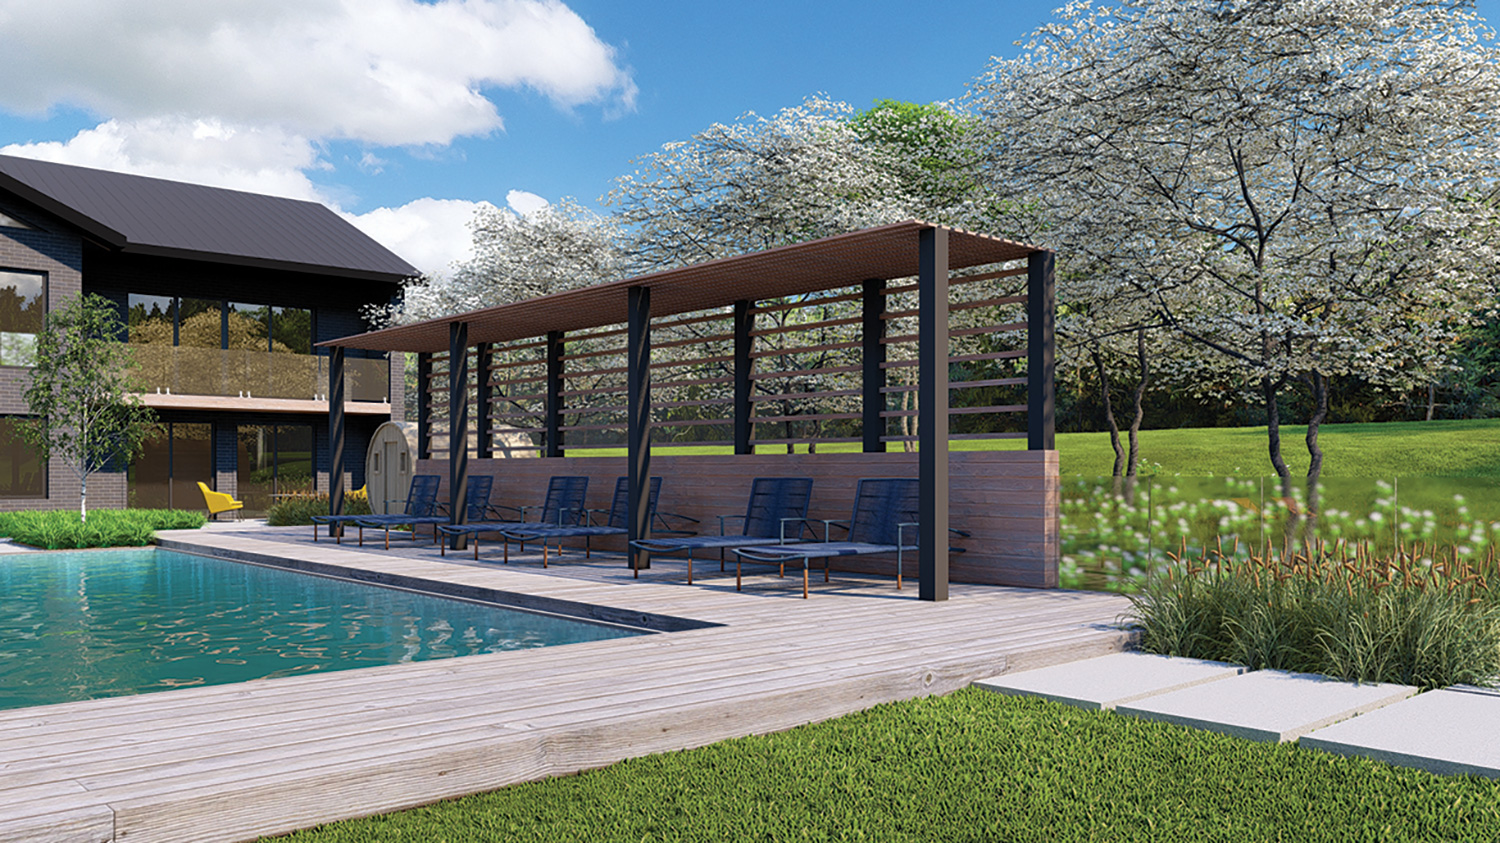 The clients requested a swimming pool, spa, sauna, shade solution, fire pit and lounge area. The renderings show different enclosures that meet municipal requirements, including a frameless glass railing